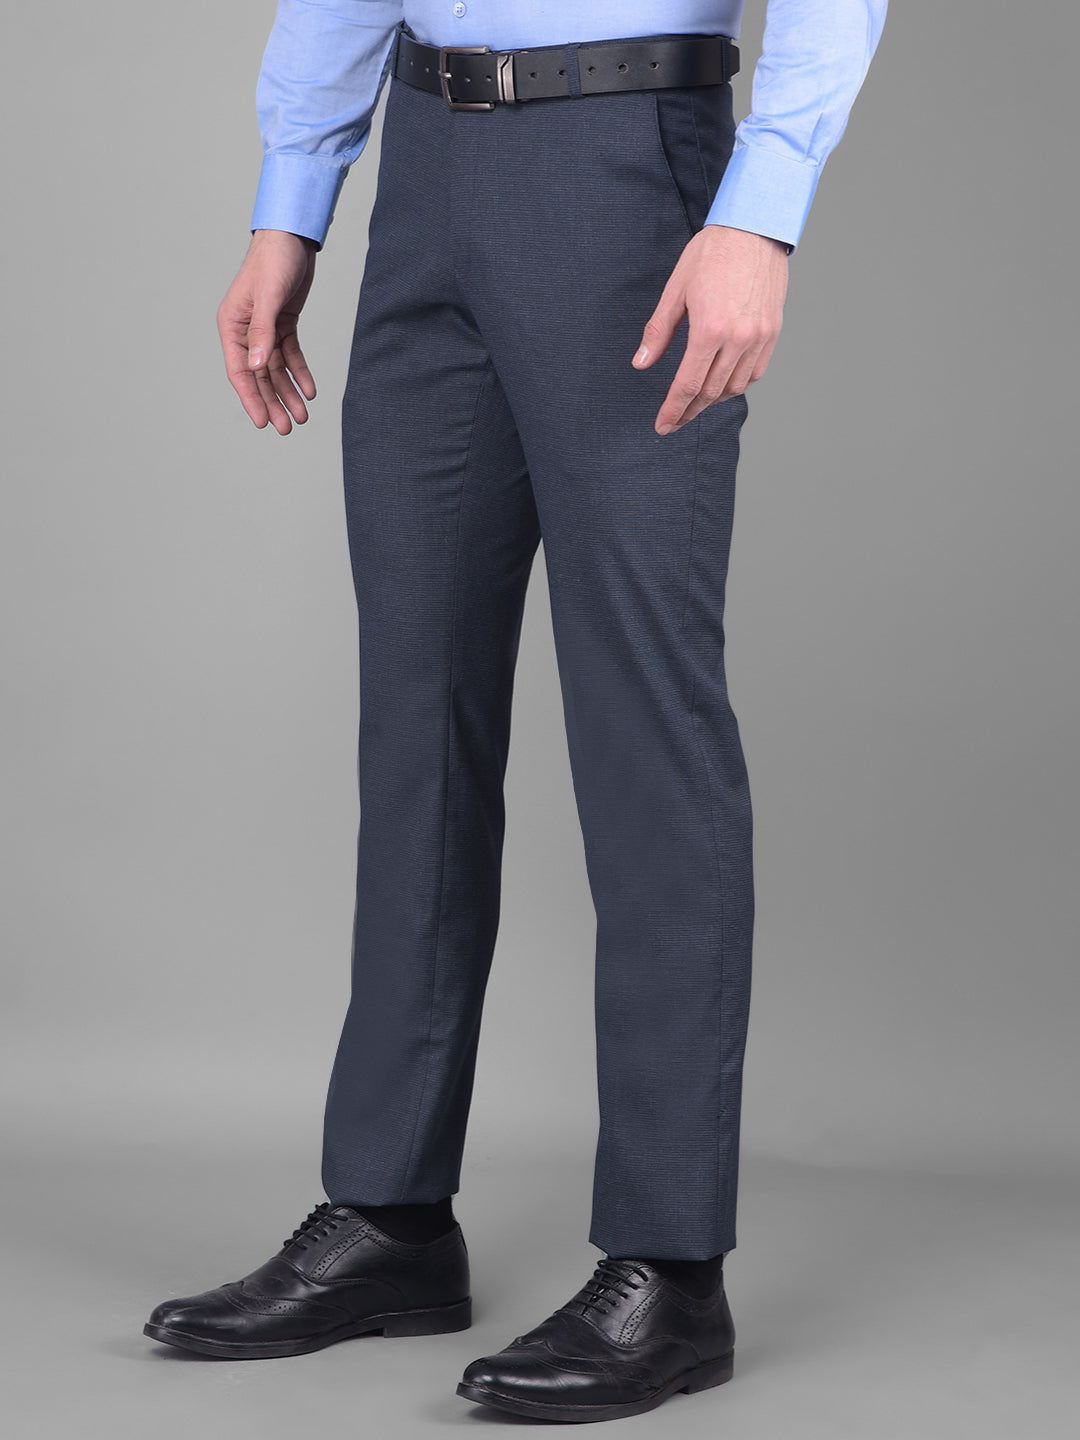 Tall Men's True Navy Suit Trousers | American Tall